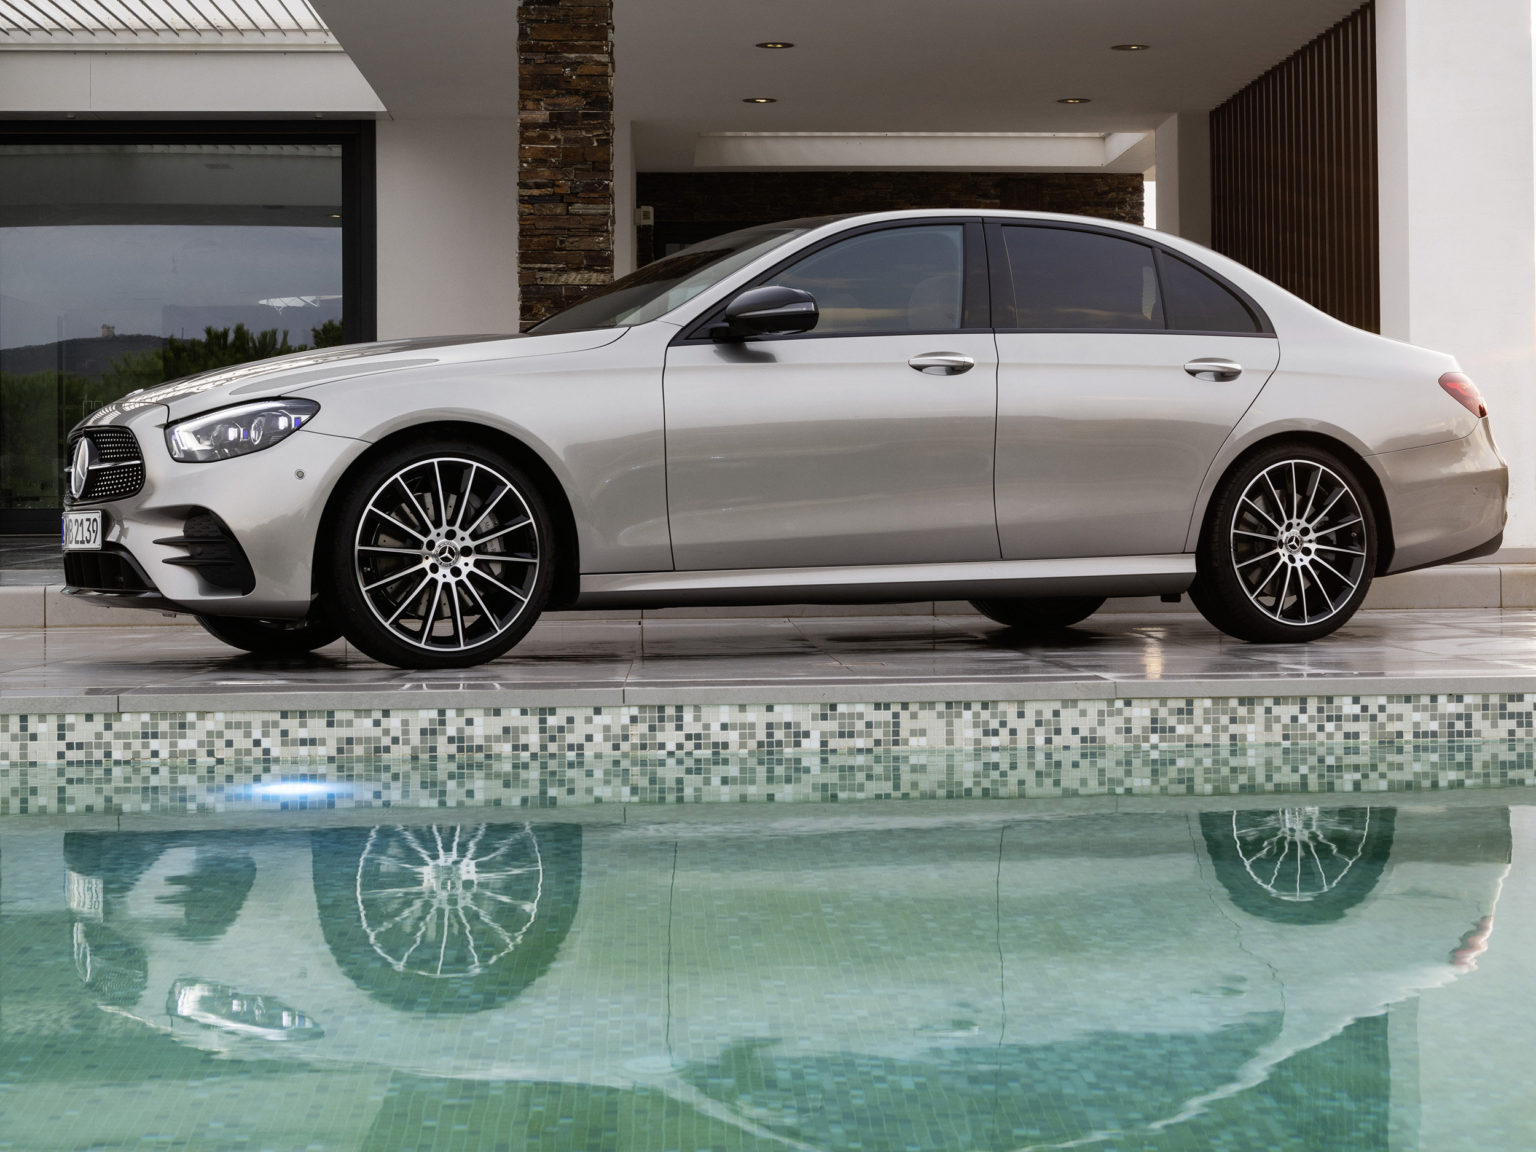 The refreshed E-Class features a strong stance, modern features, and new styling.